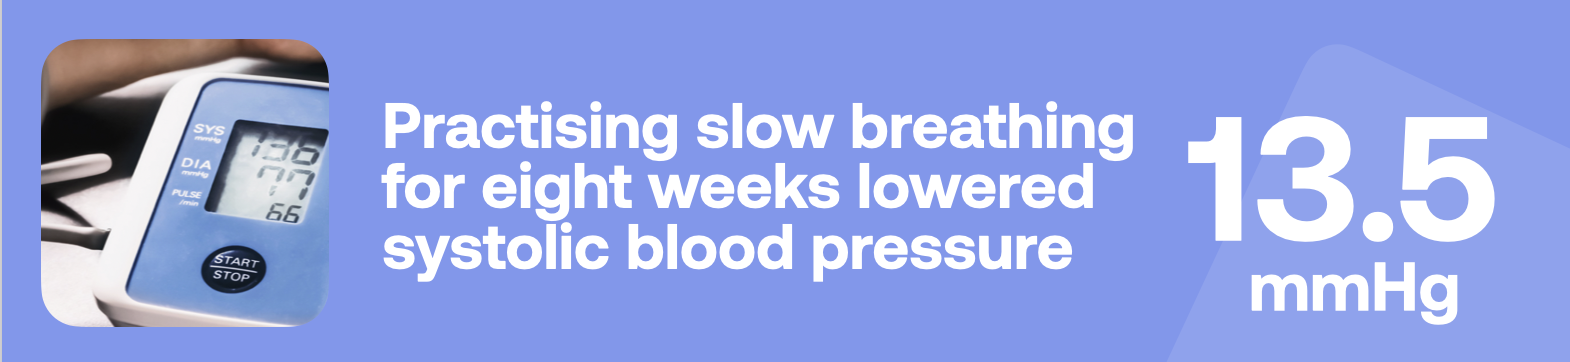 Practising slow breathing for eight weeks lowered systolic blood pressure 13.5 mmHg